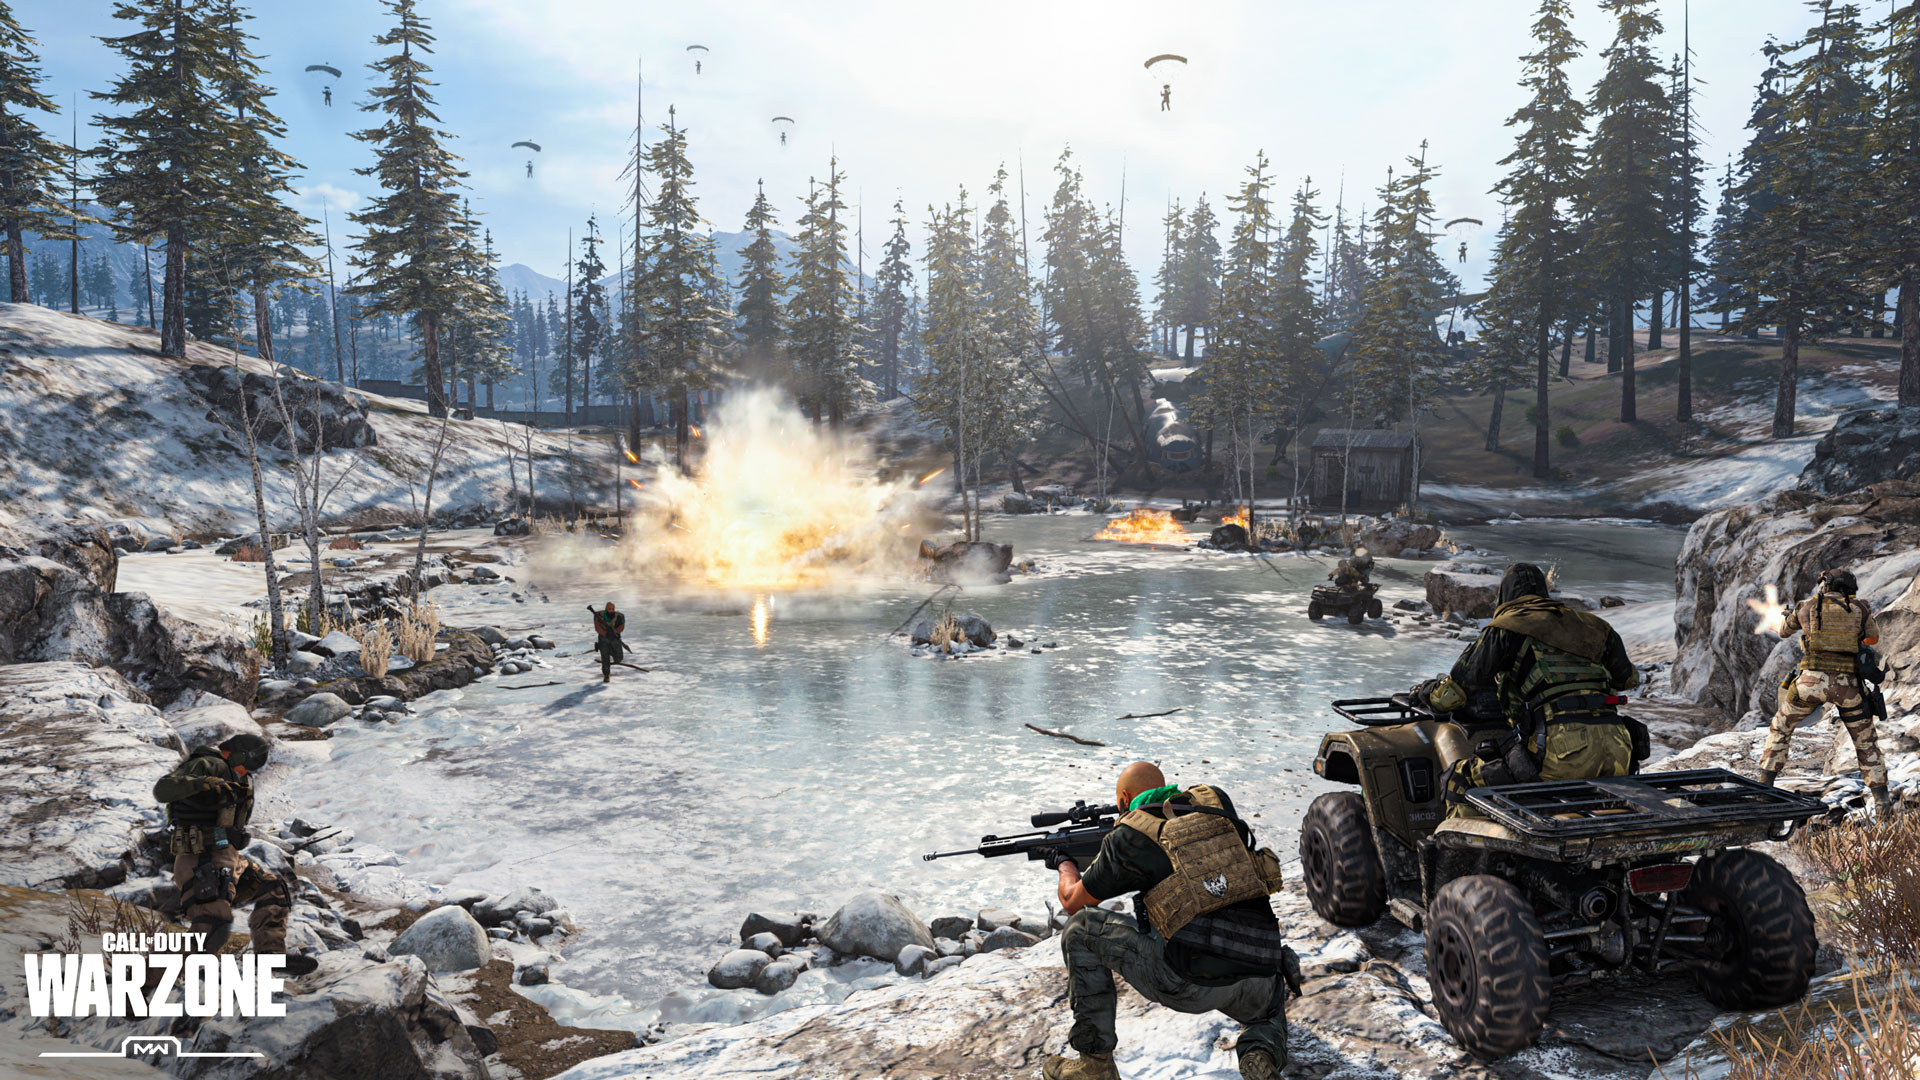 FreetoPlay Call of Duty® Warzone is Live and Available for Everyone